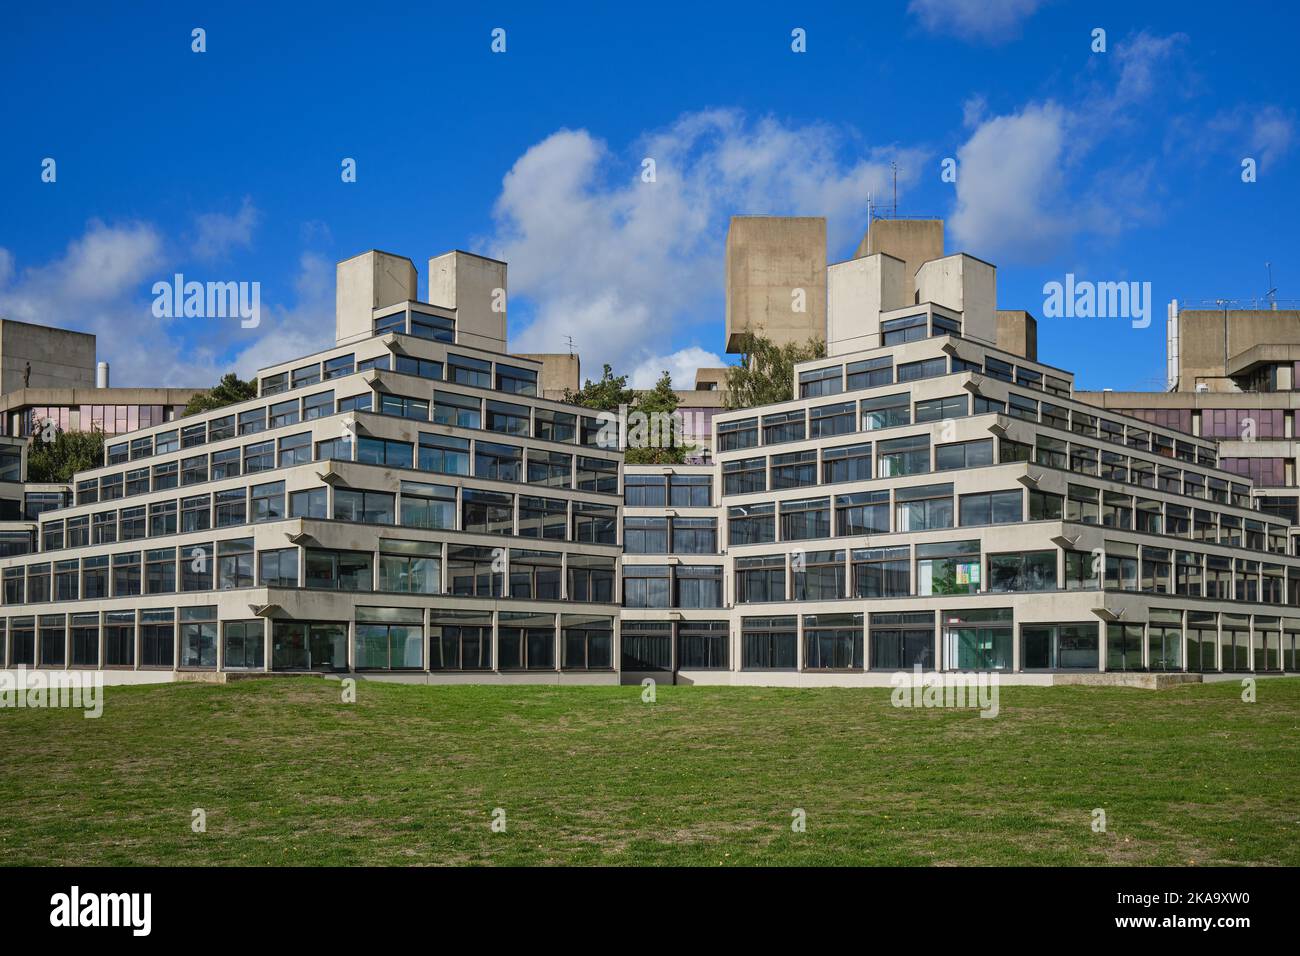 Student flats, known as the Ziggurats, at University of East Anglia, Norwich, designed by Sir Denys Lasdun in the 1960s Stock Photo